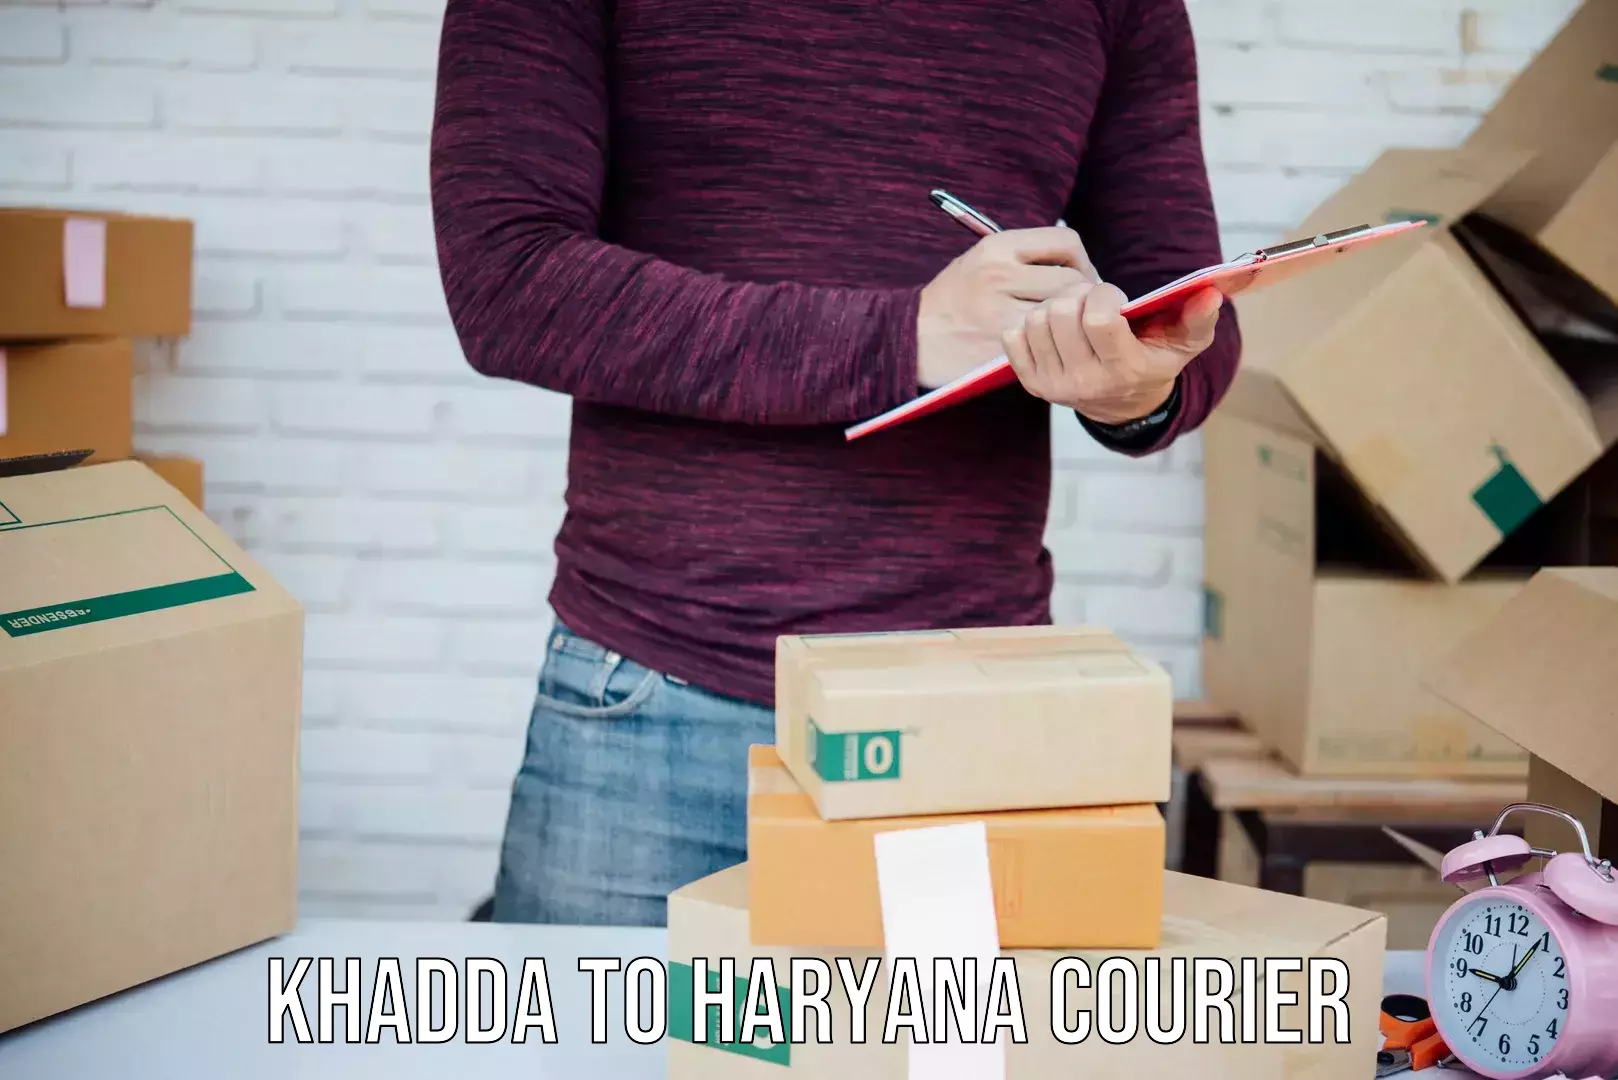 Cash on delivery service Khadda to Bhiwani